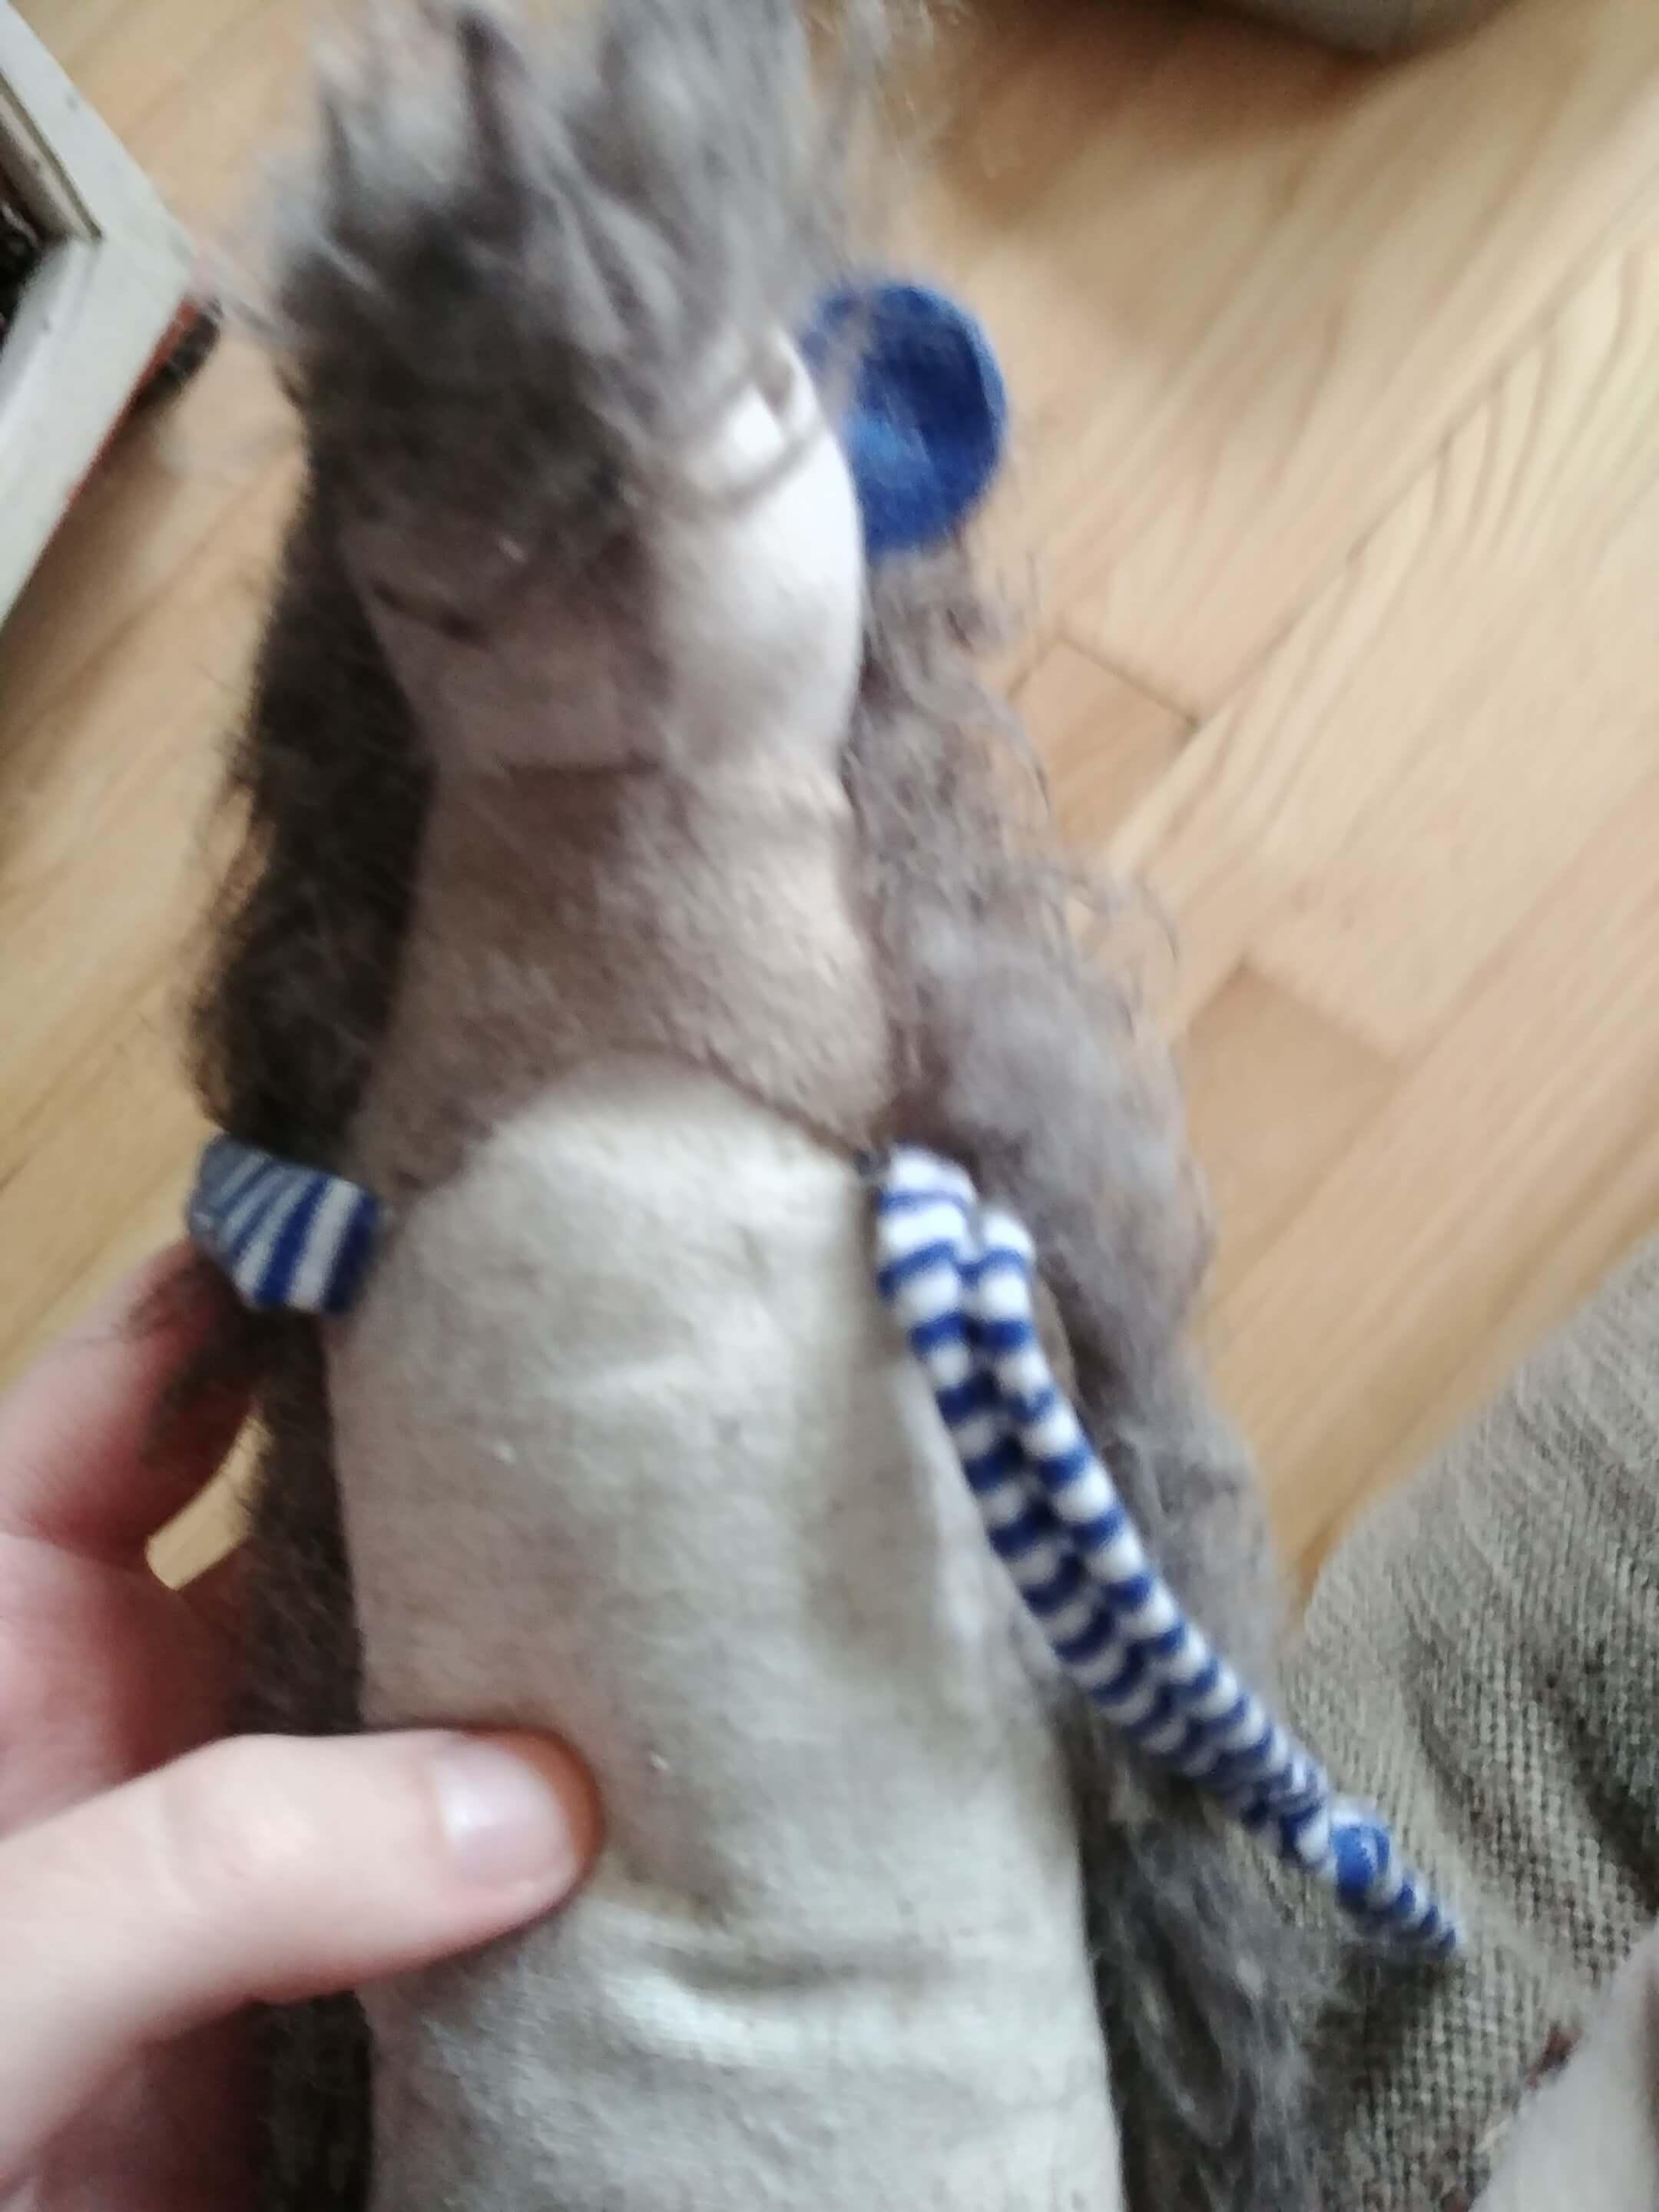 A furry little stuffed animal of indeterminate species that looks the worse for wear and tear. He has two floppy little arms that are now both securely attached 